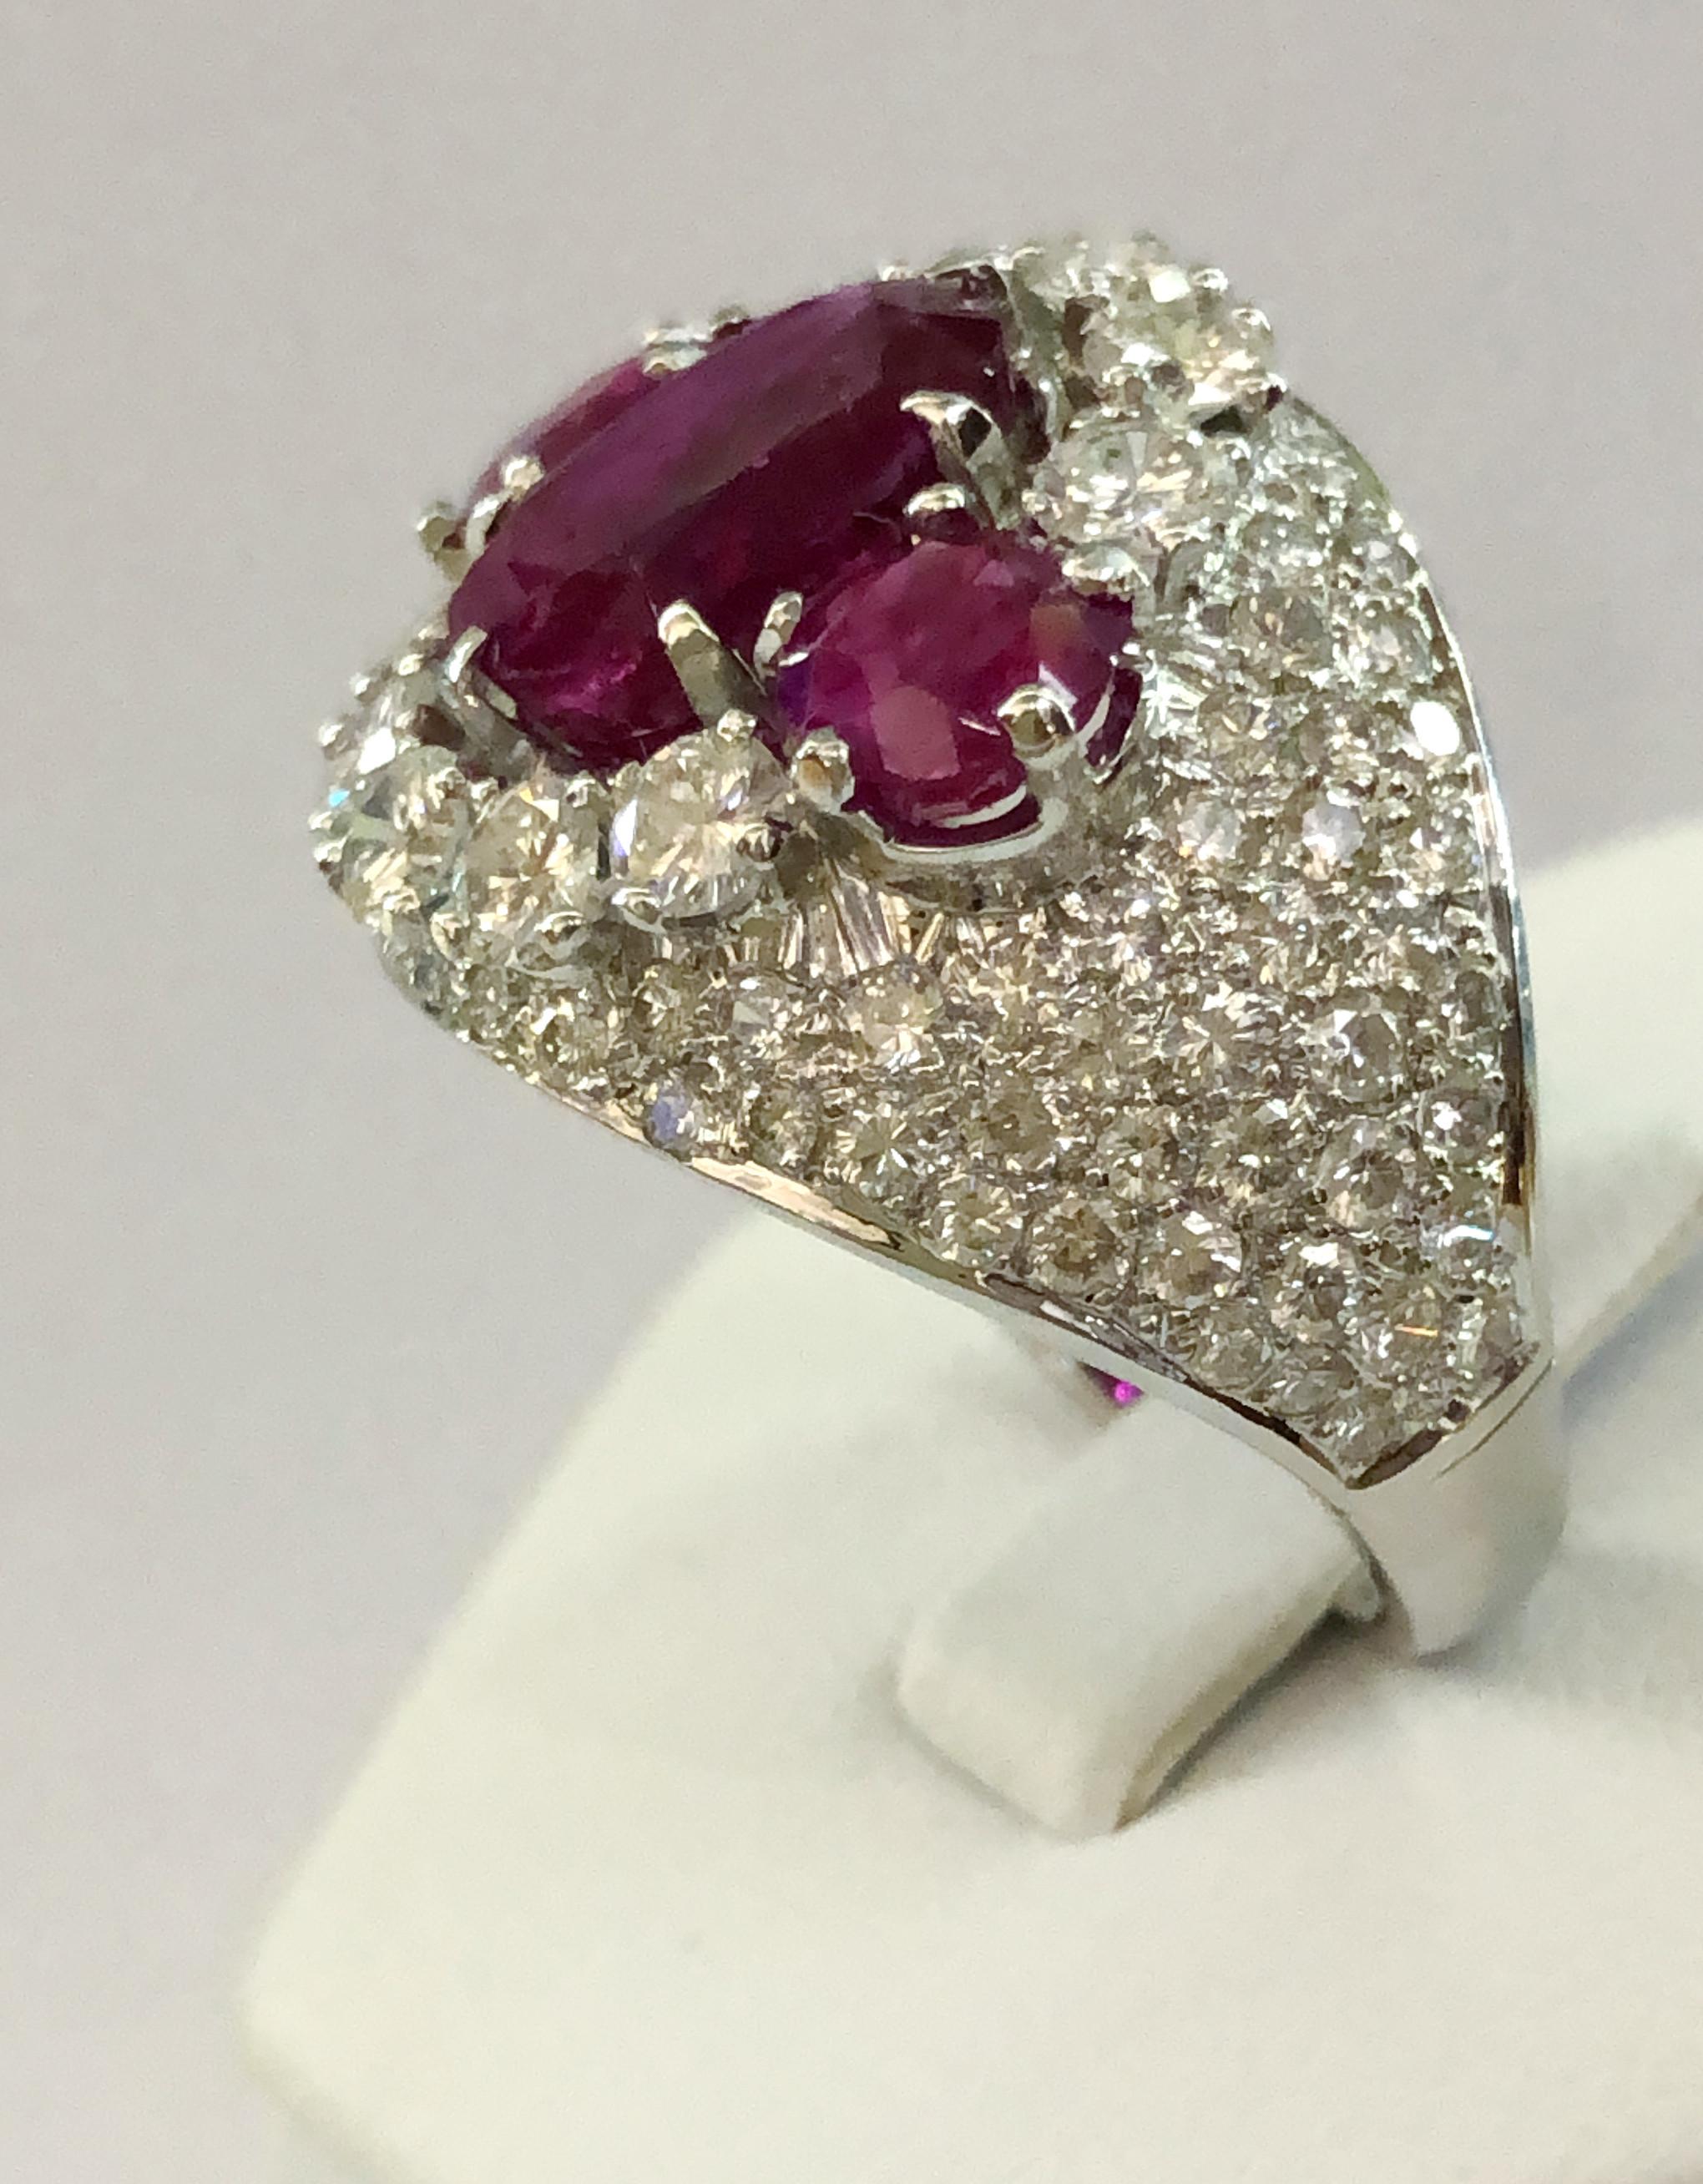 18 karat white gold ring with three rubies for a total of 3 karats and brilliant diamonds for a total of 2.5 karats mounted in Pave setting, Italy 1960-1970s
Ring size US 7